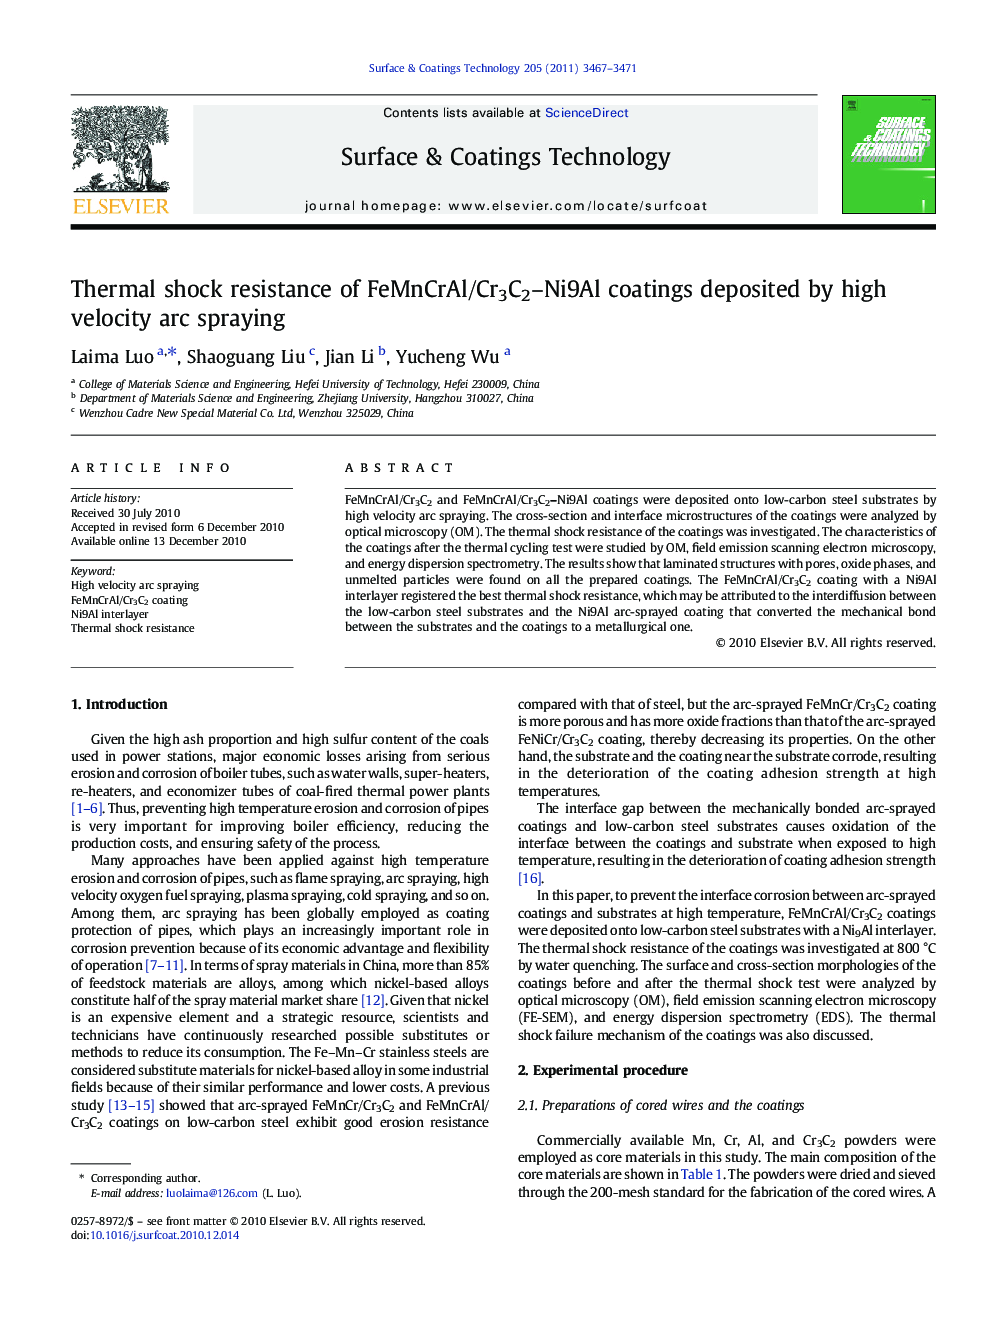 Thermal shock resistance of FeMnCrAl/Cr3C2-Ni9Al coatings deposited by high velocity arc spraying